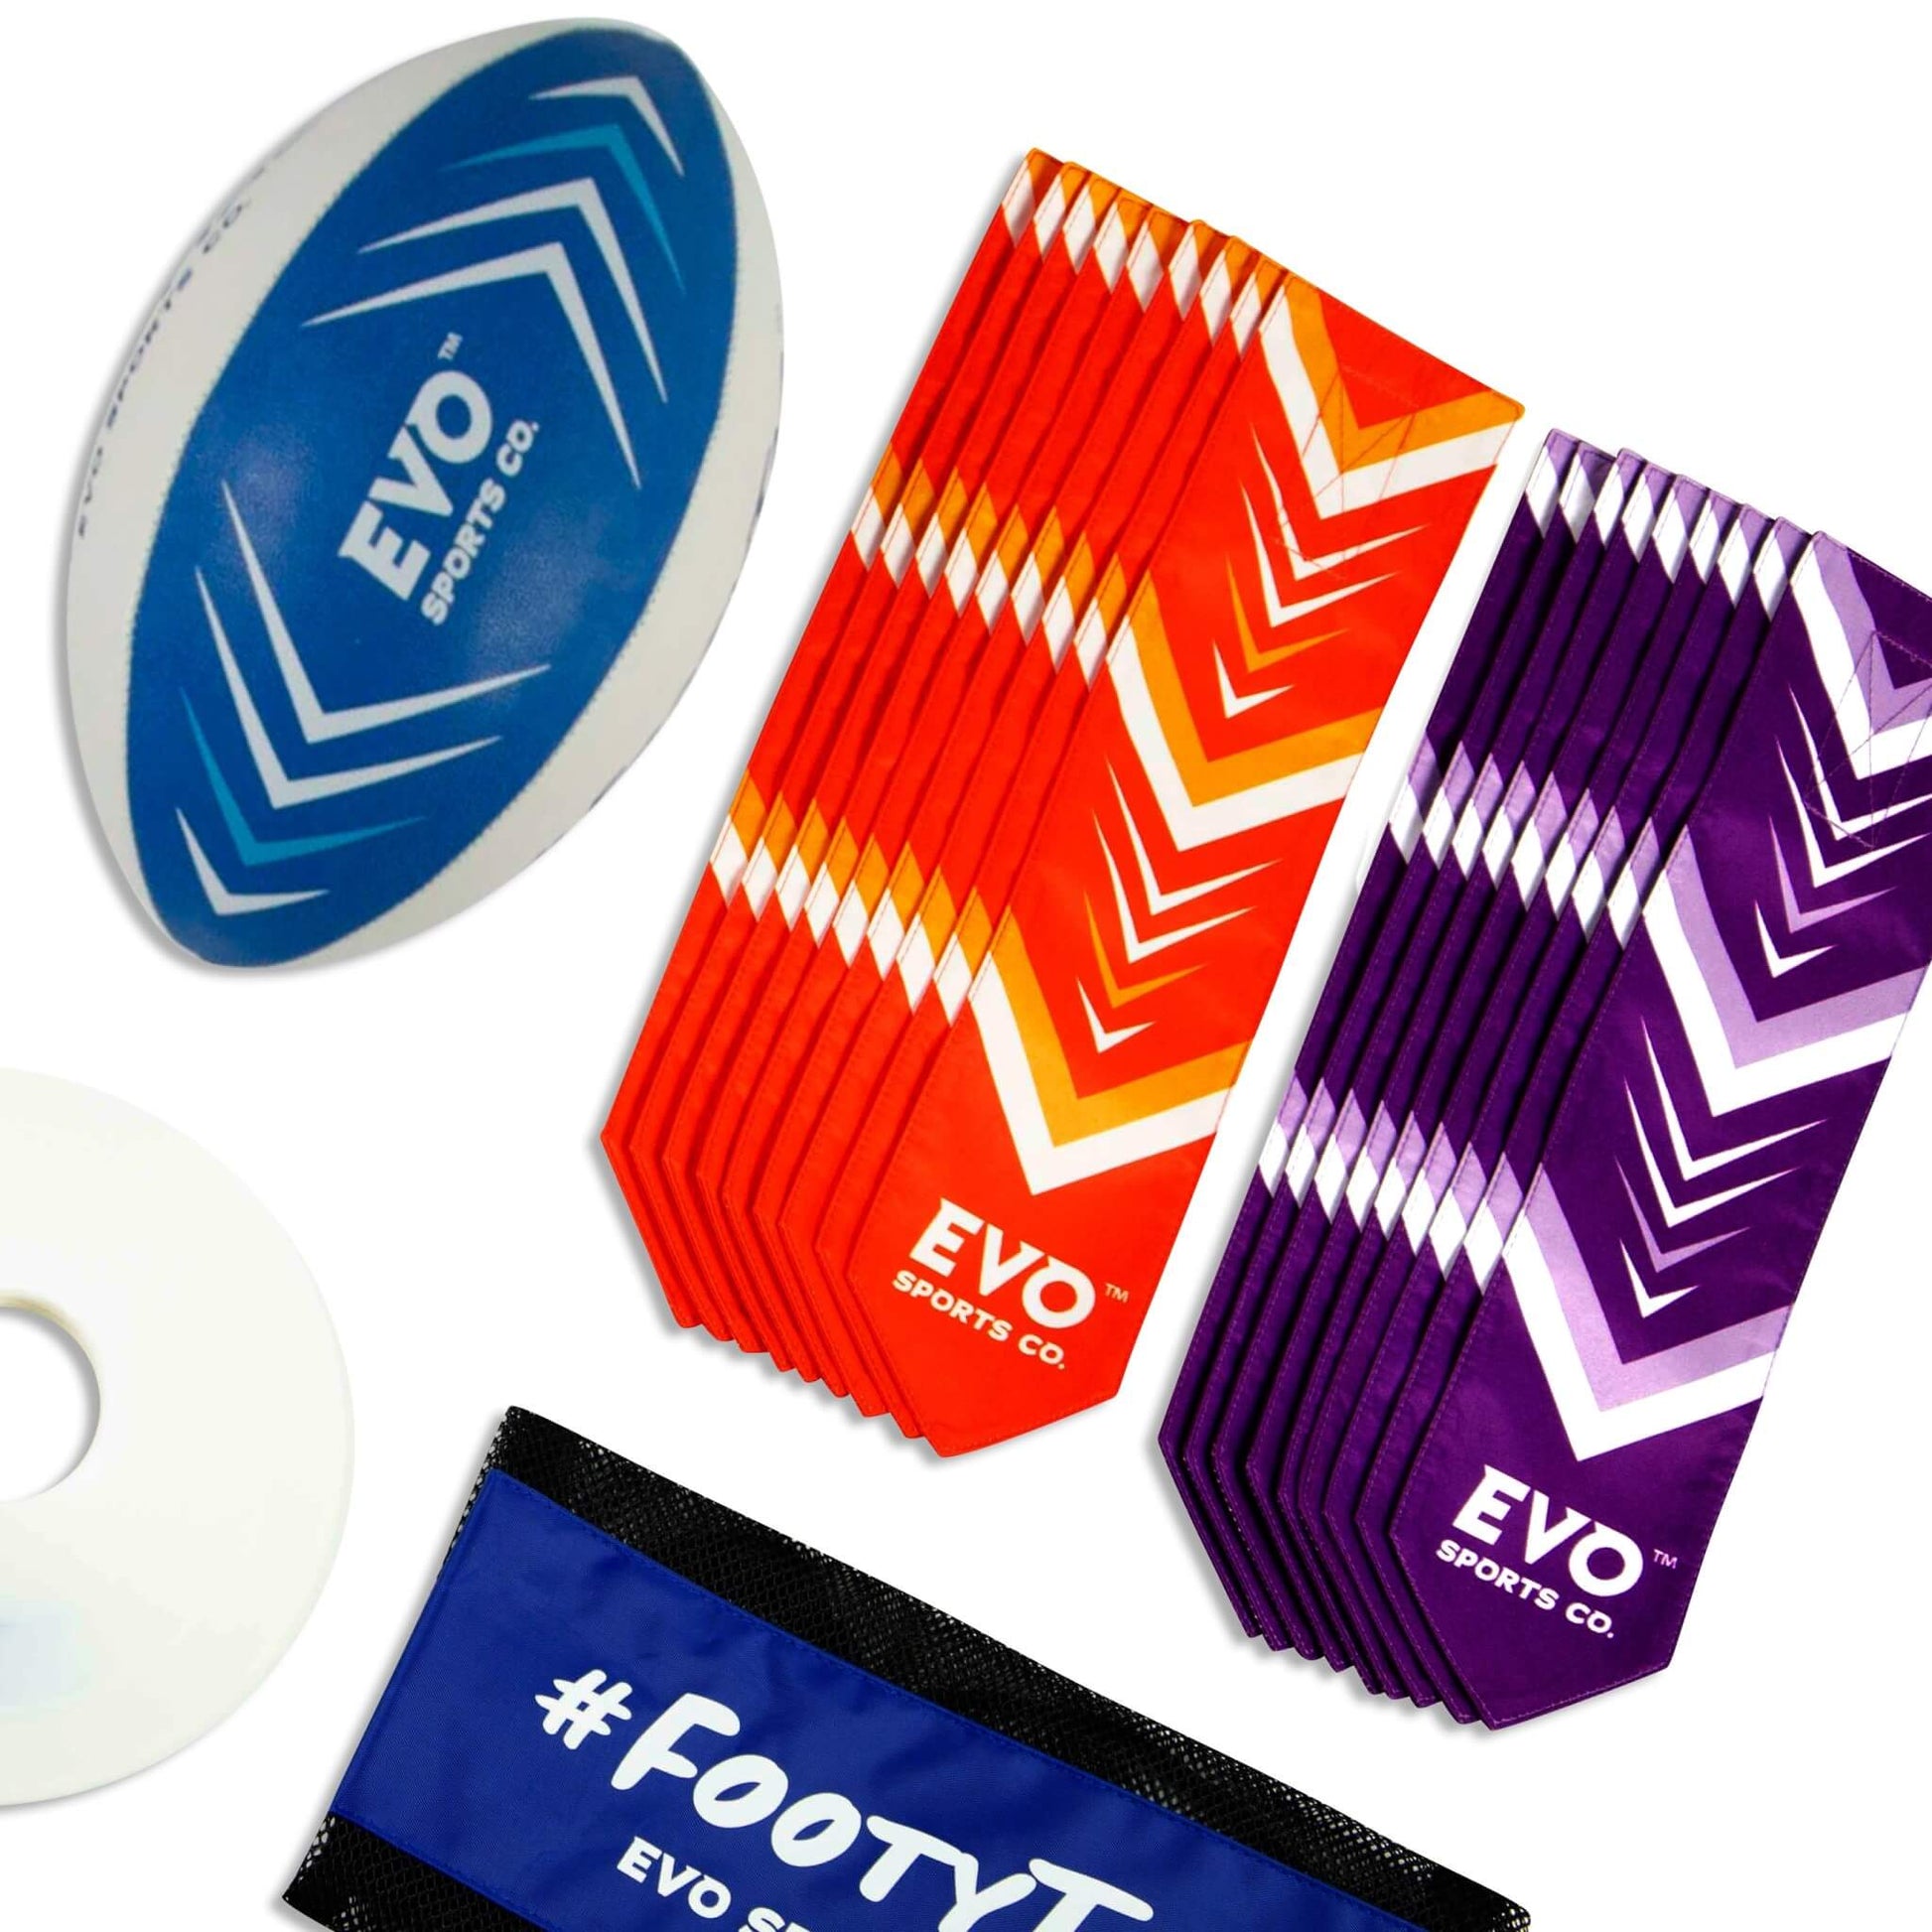 FootyTag - Kids Rugby Tags Kit - 10 Player - Evo Sports Co